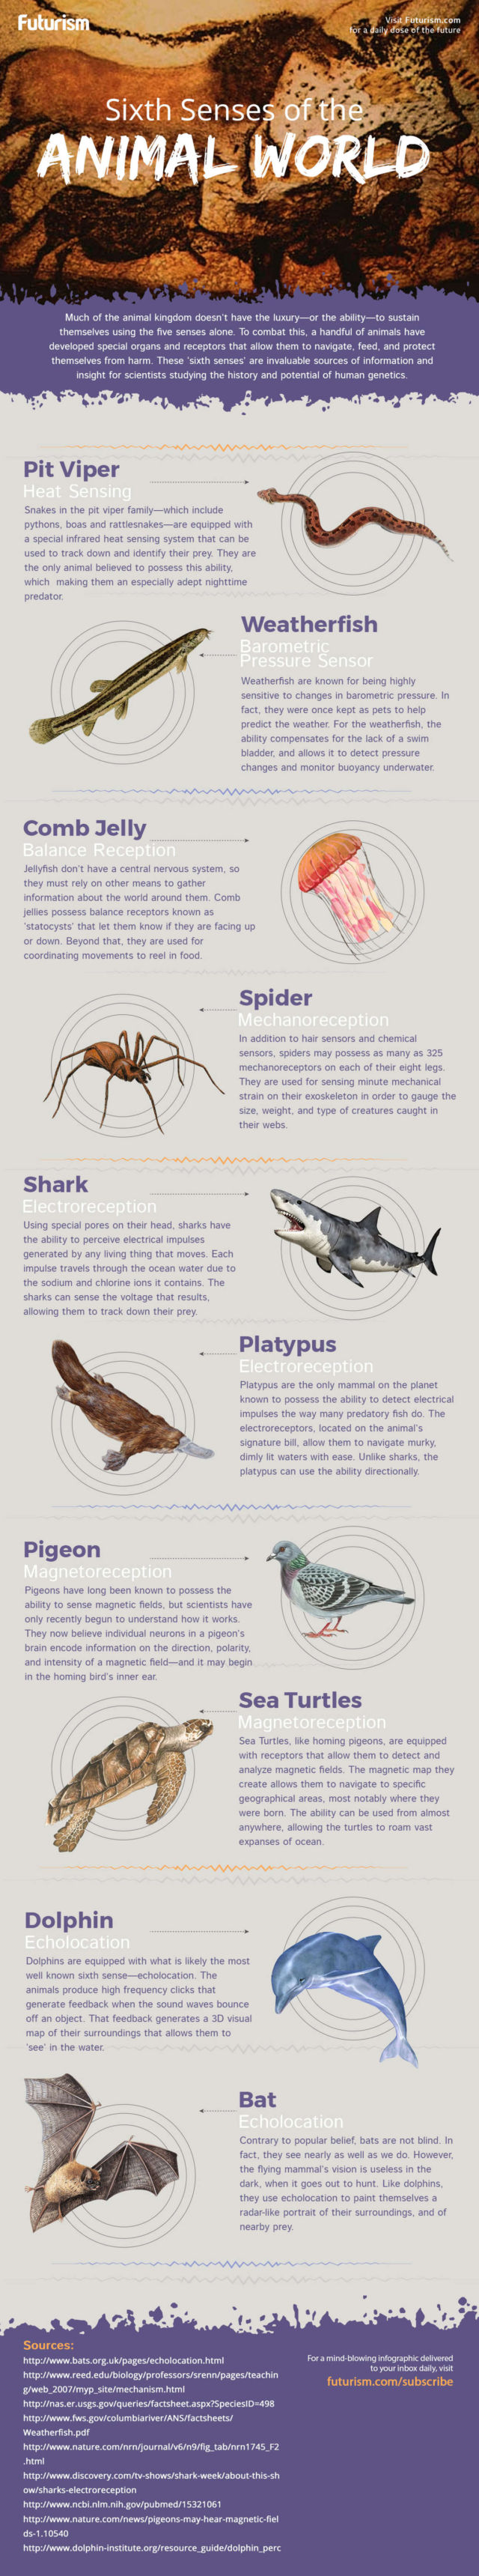 Sixth Senses in the Animal world - infographic 